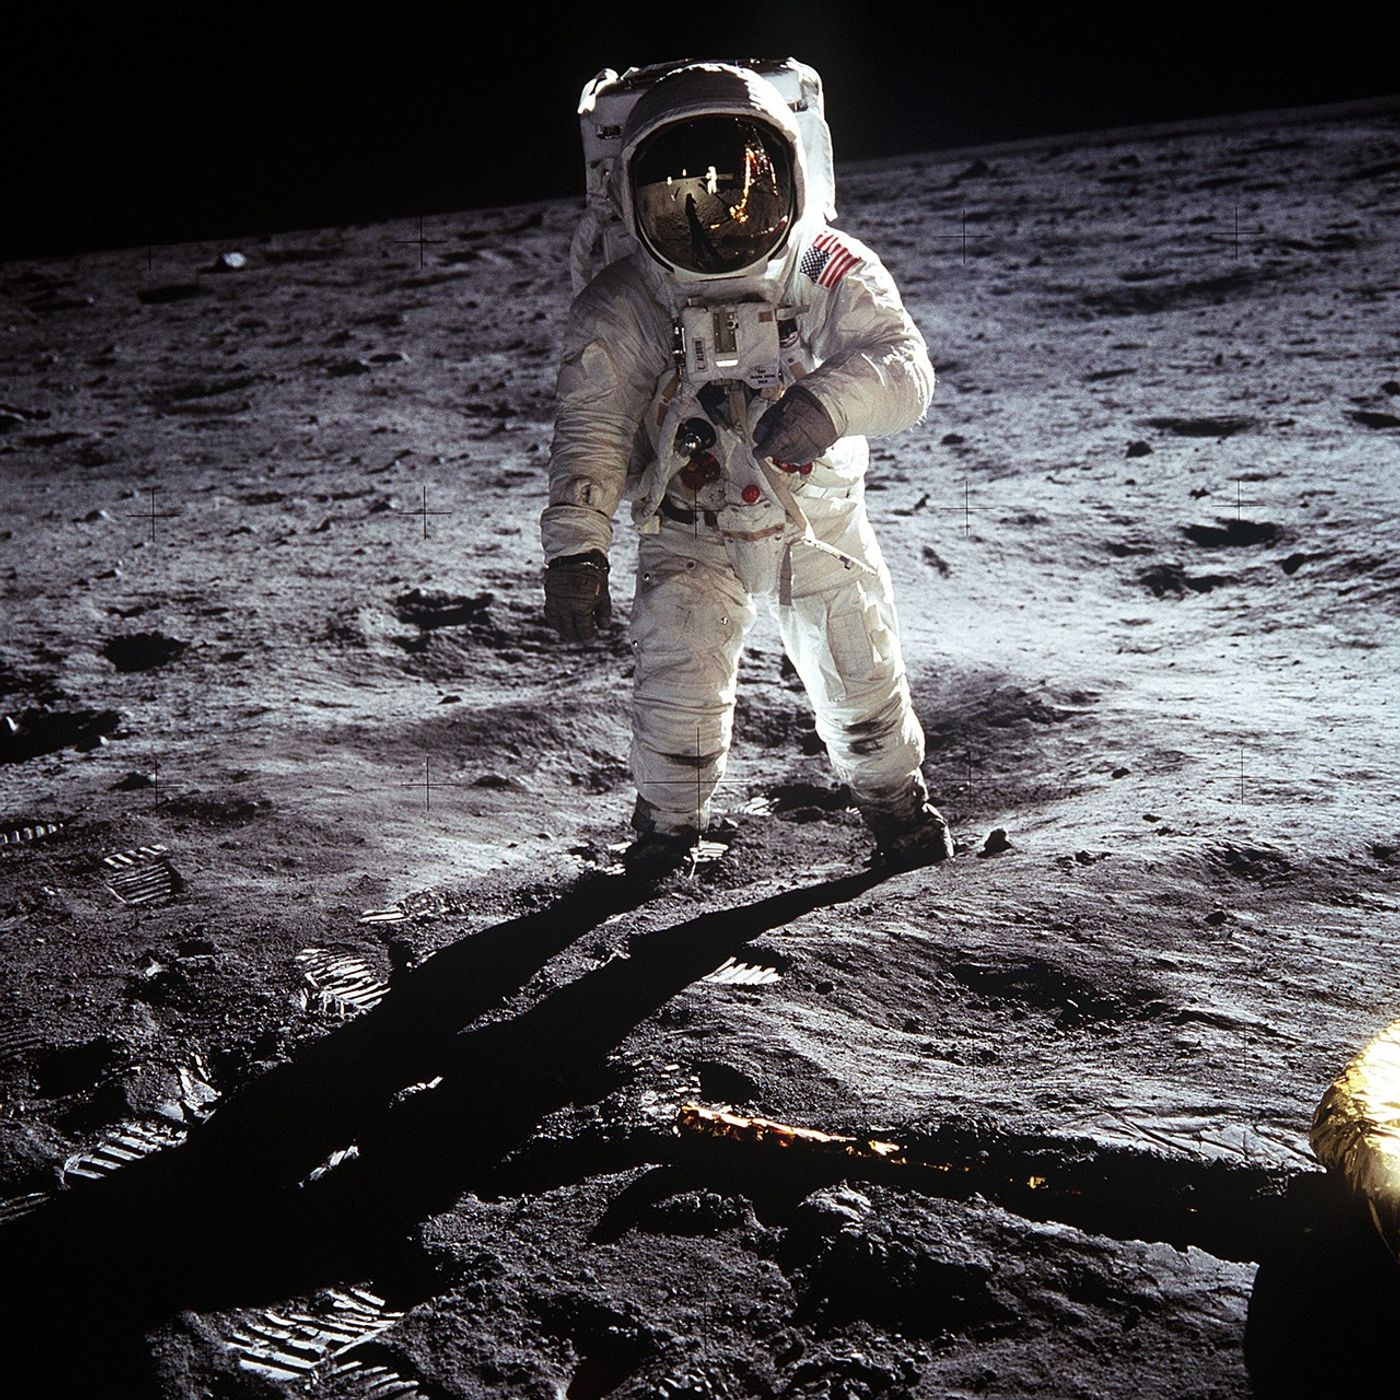 A famous astronaut photo captured during the Moon landing from the Apollo 11 mission.